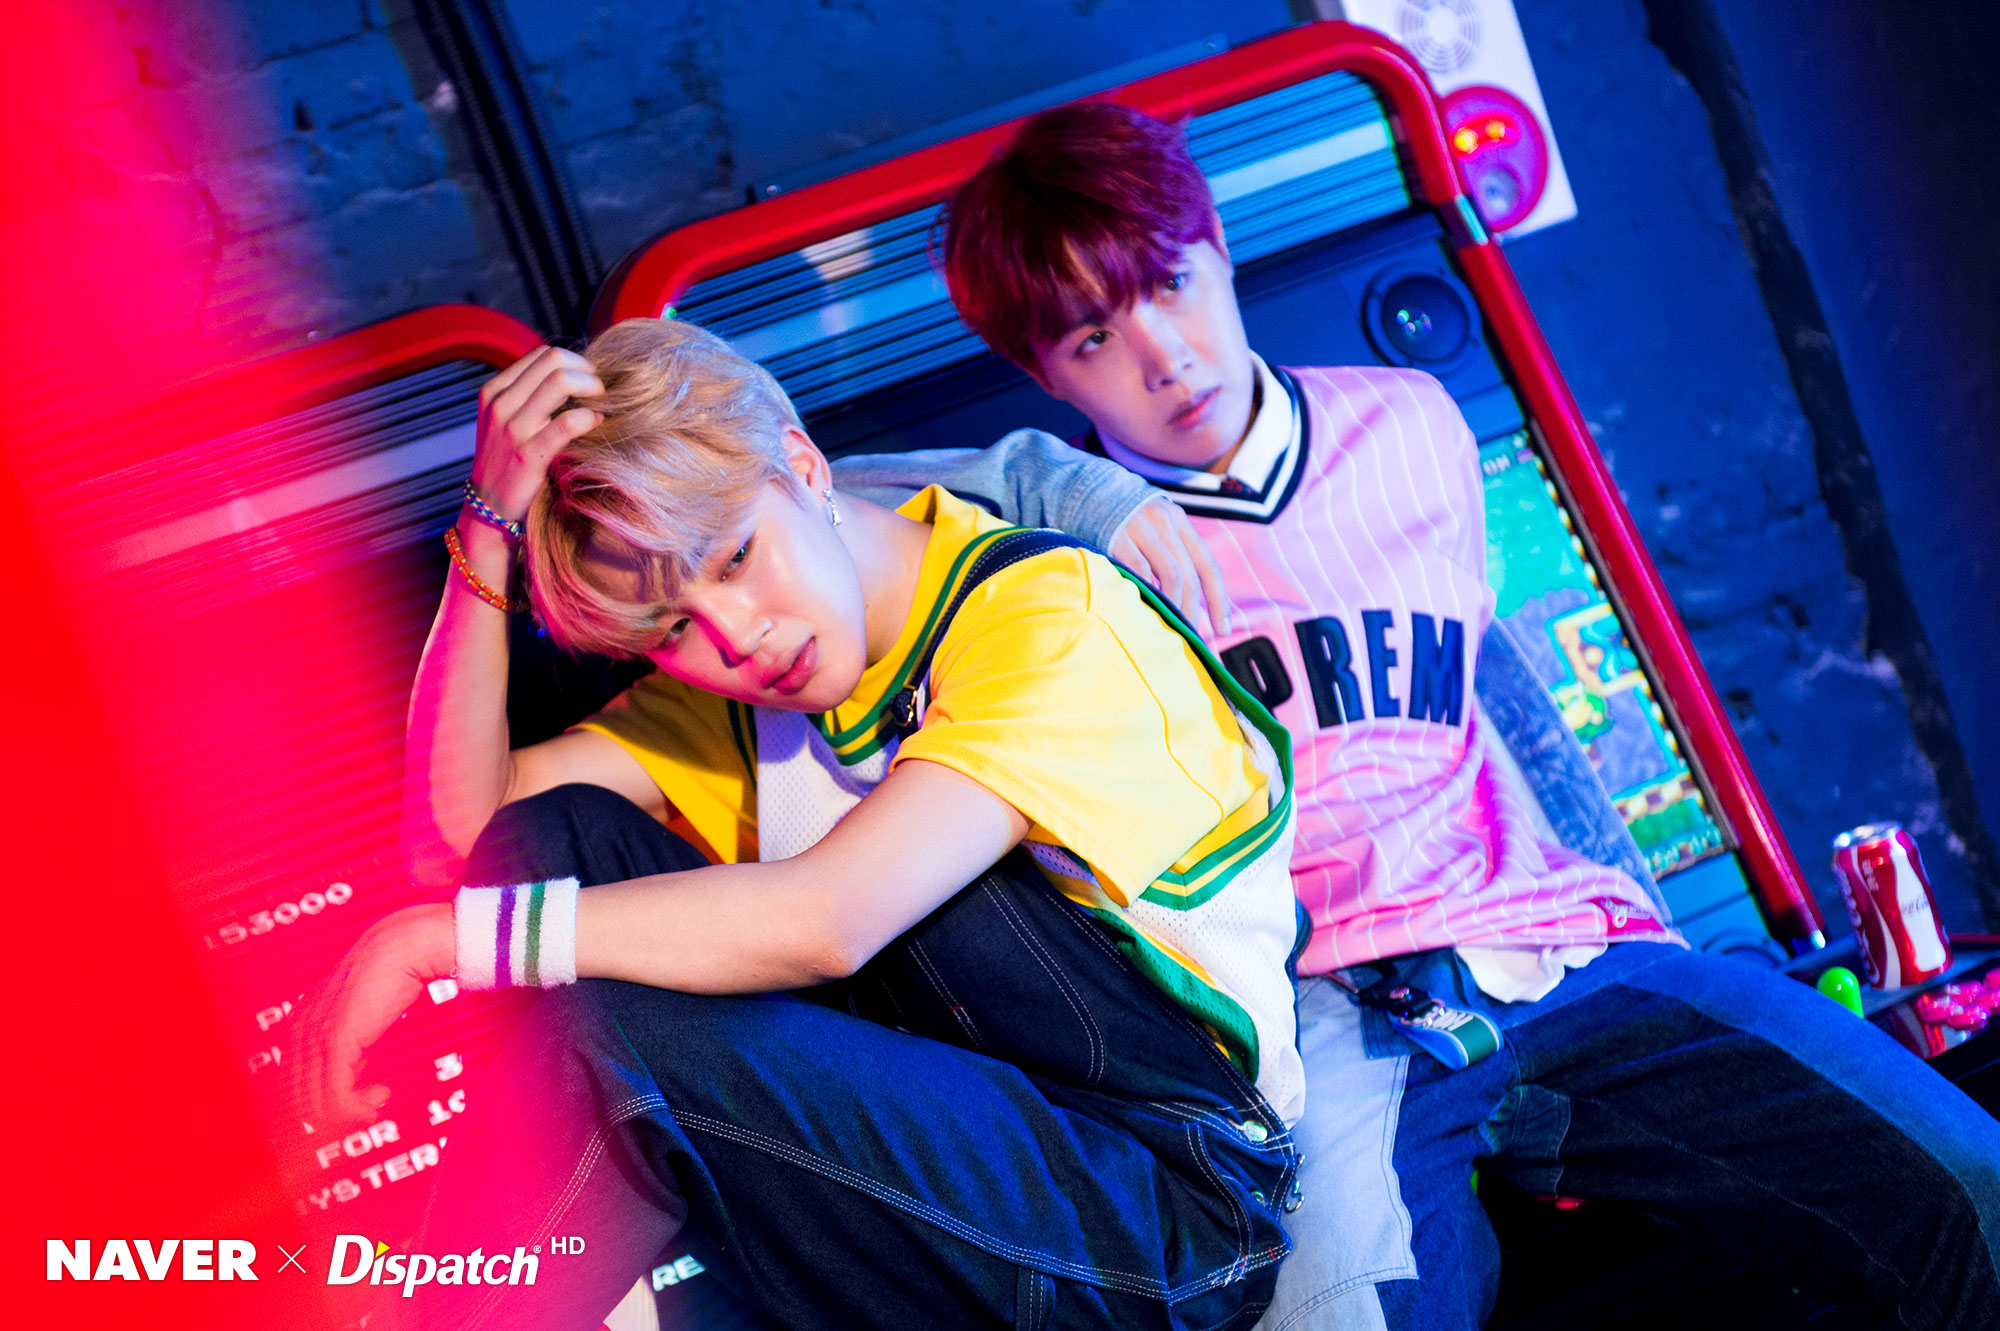 [Picture] BTS 5th Mini Album LOVE YOURSELF 承 ‘Her’ Jacket Photos (RM,J